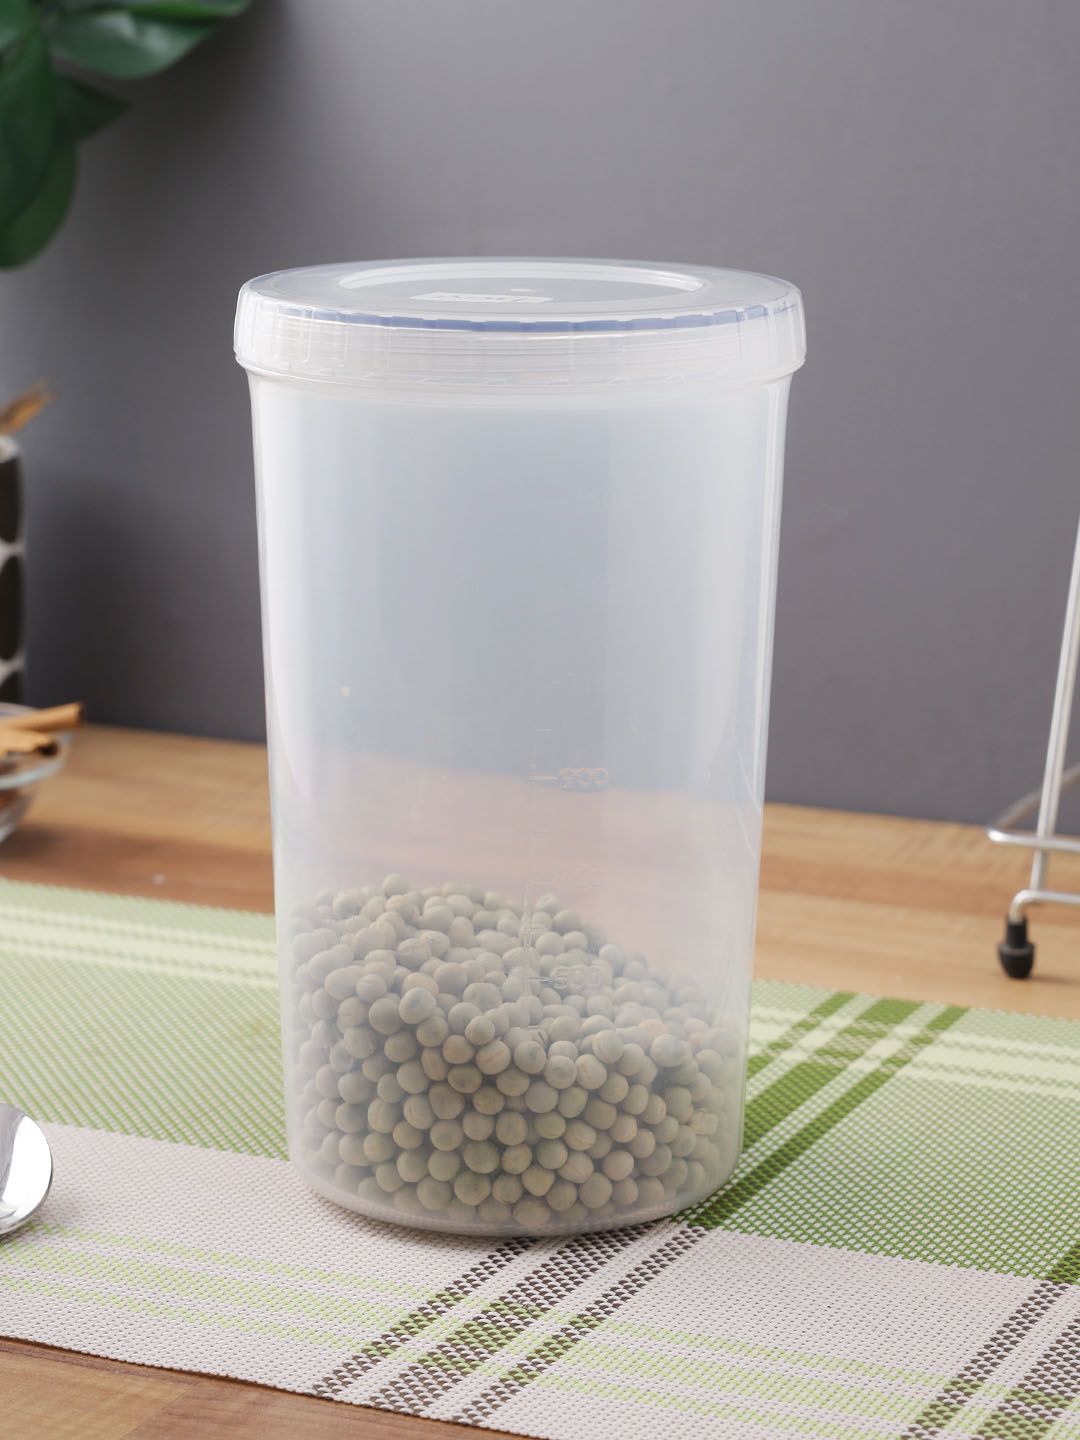 Lock & Lock Transparent Solid Food Storage Container With Lid Price in India